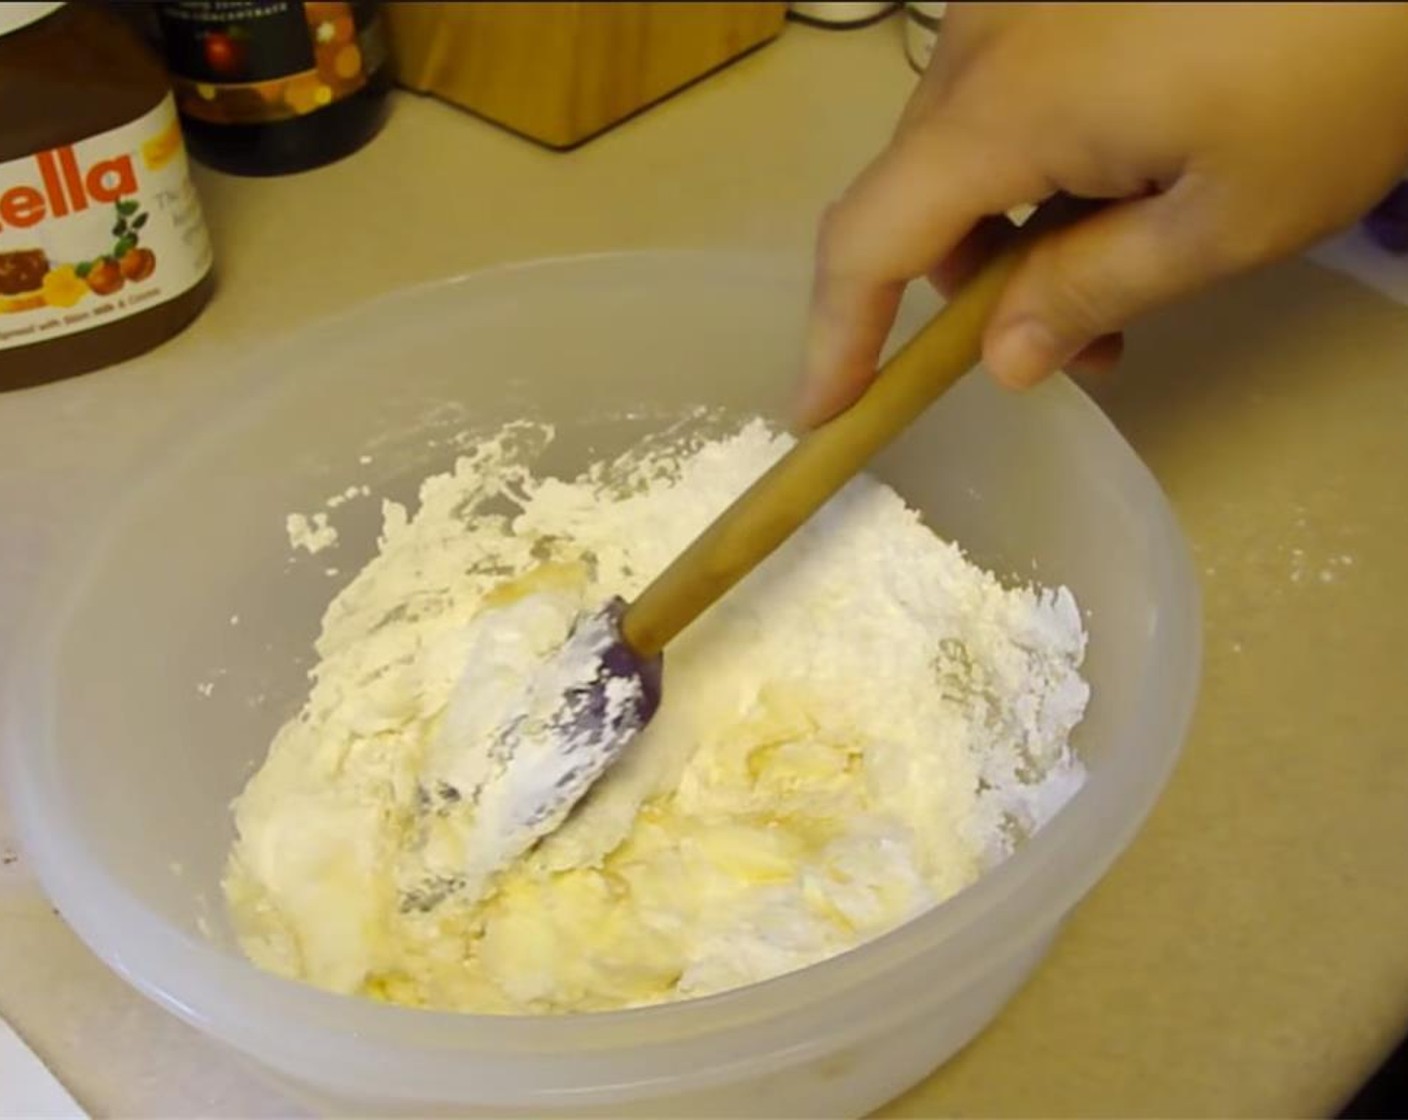 step 4 In a small bowl, stir together the Philadelphia Original Soft Cheese (1 cup), Powdered Confectioners Sugar (3/4 cup), and Vanilla Extract (1/2 Tbsp). Microwave on high for 10-15 seconds, or until soft and easy to pour.